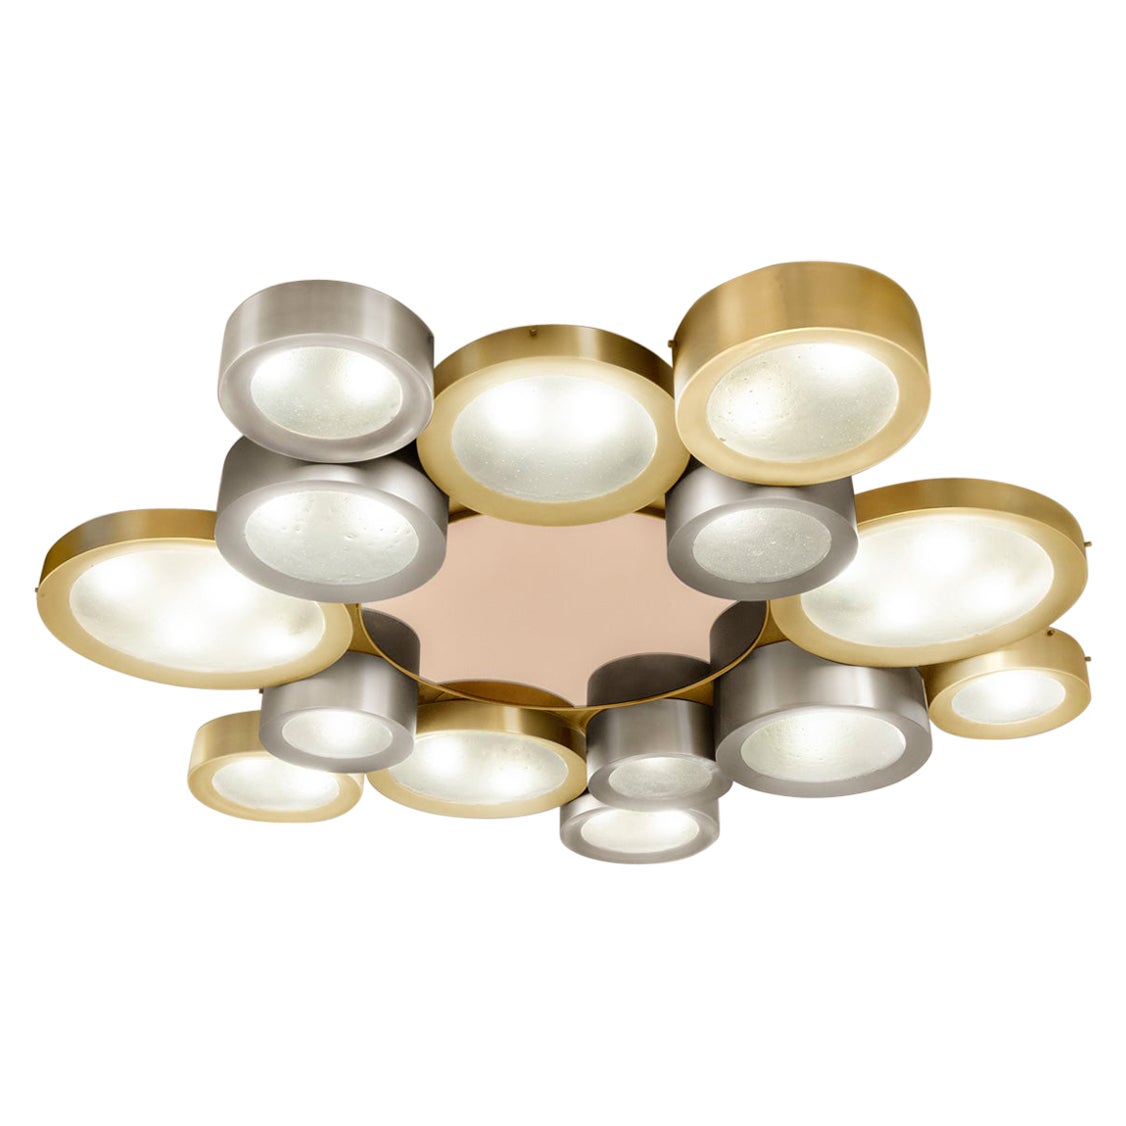 Helios 66 Ceiling Light by Gaspare Asaro-Satin Brass and Satin Nickel Finish For Sale